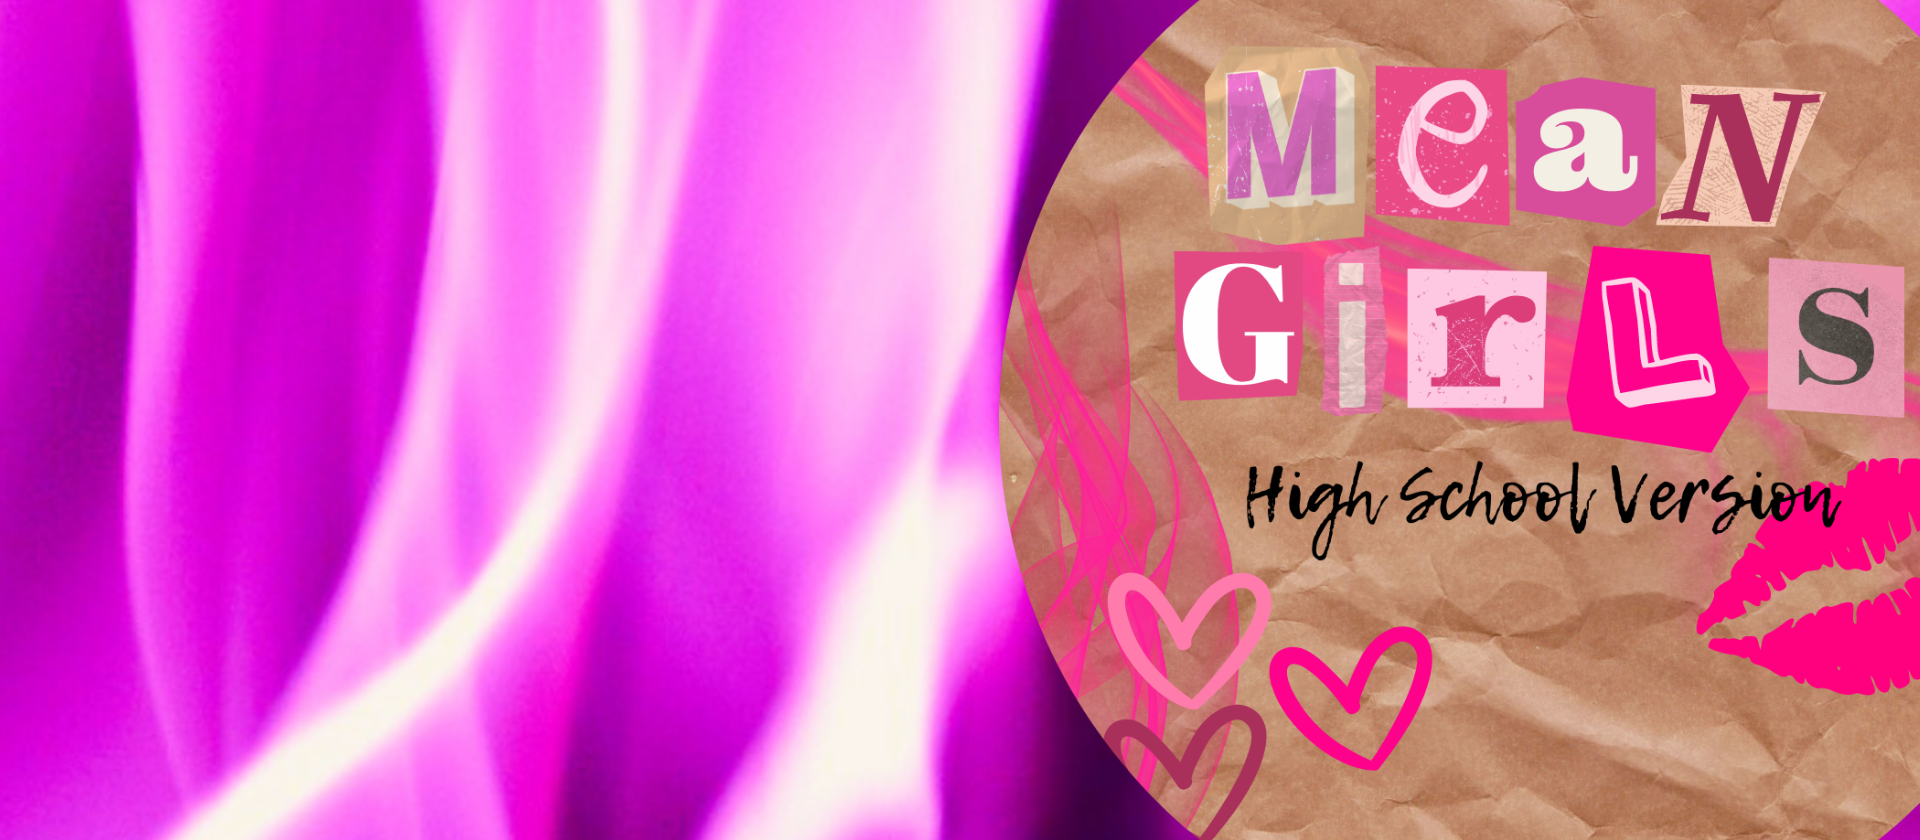 Web banner for mean girls